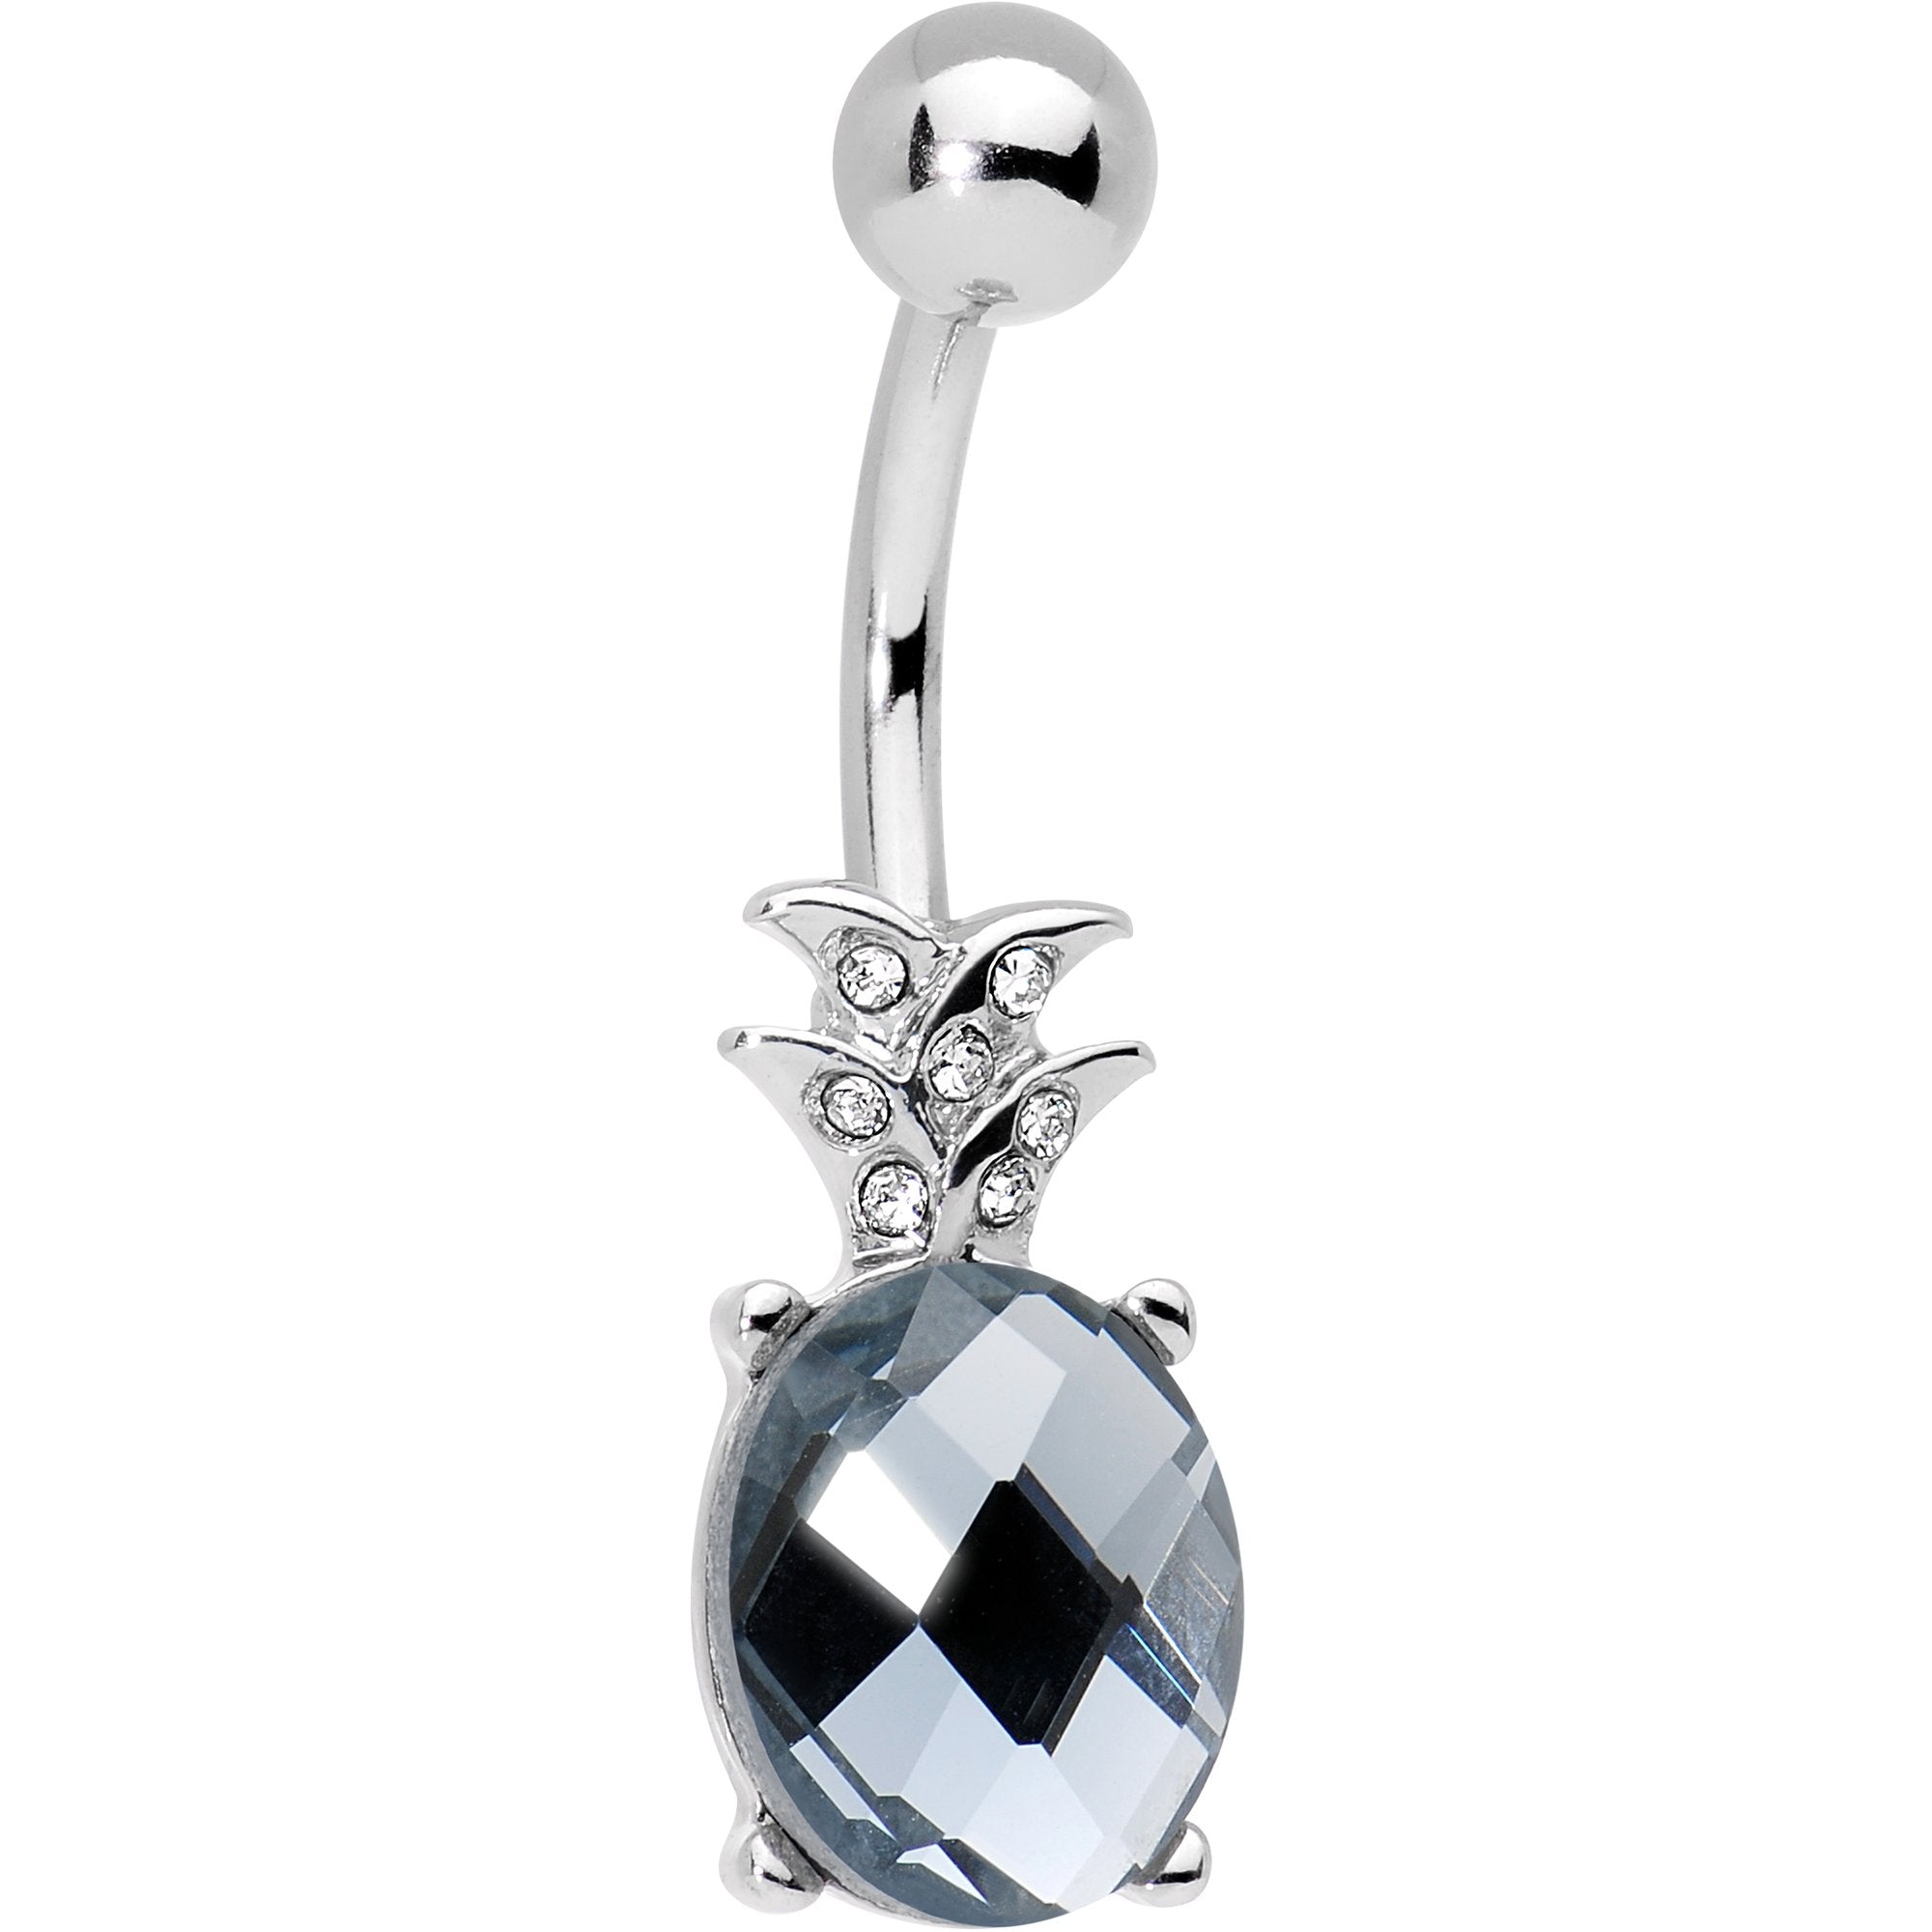 Clear Gem Juicy Pineapple Belly Ring